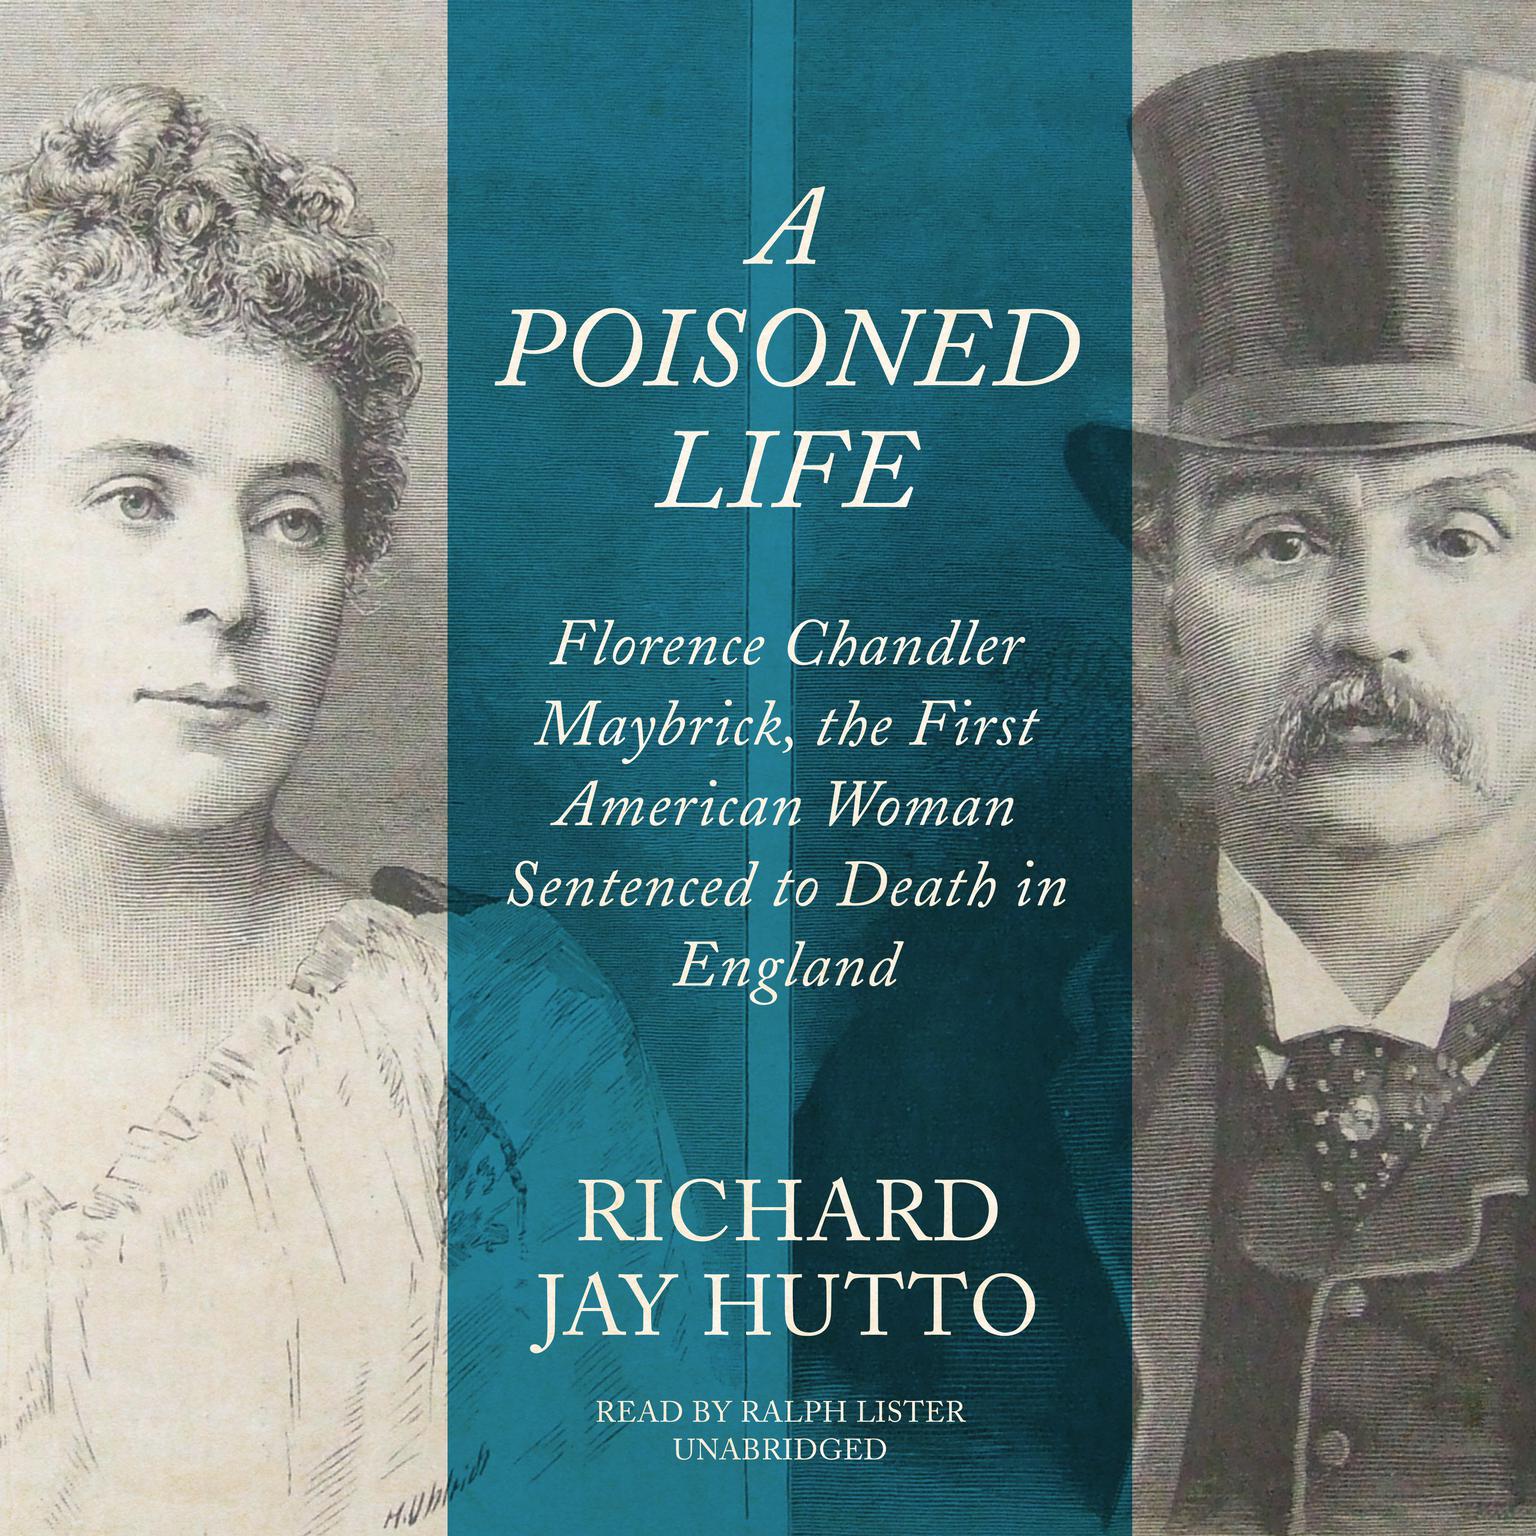 A Poisoned Life: Florence Chandler Maybrick, the First American Woman Sentenced to Death in England  Audiobook, by Richard Jay Hutto